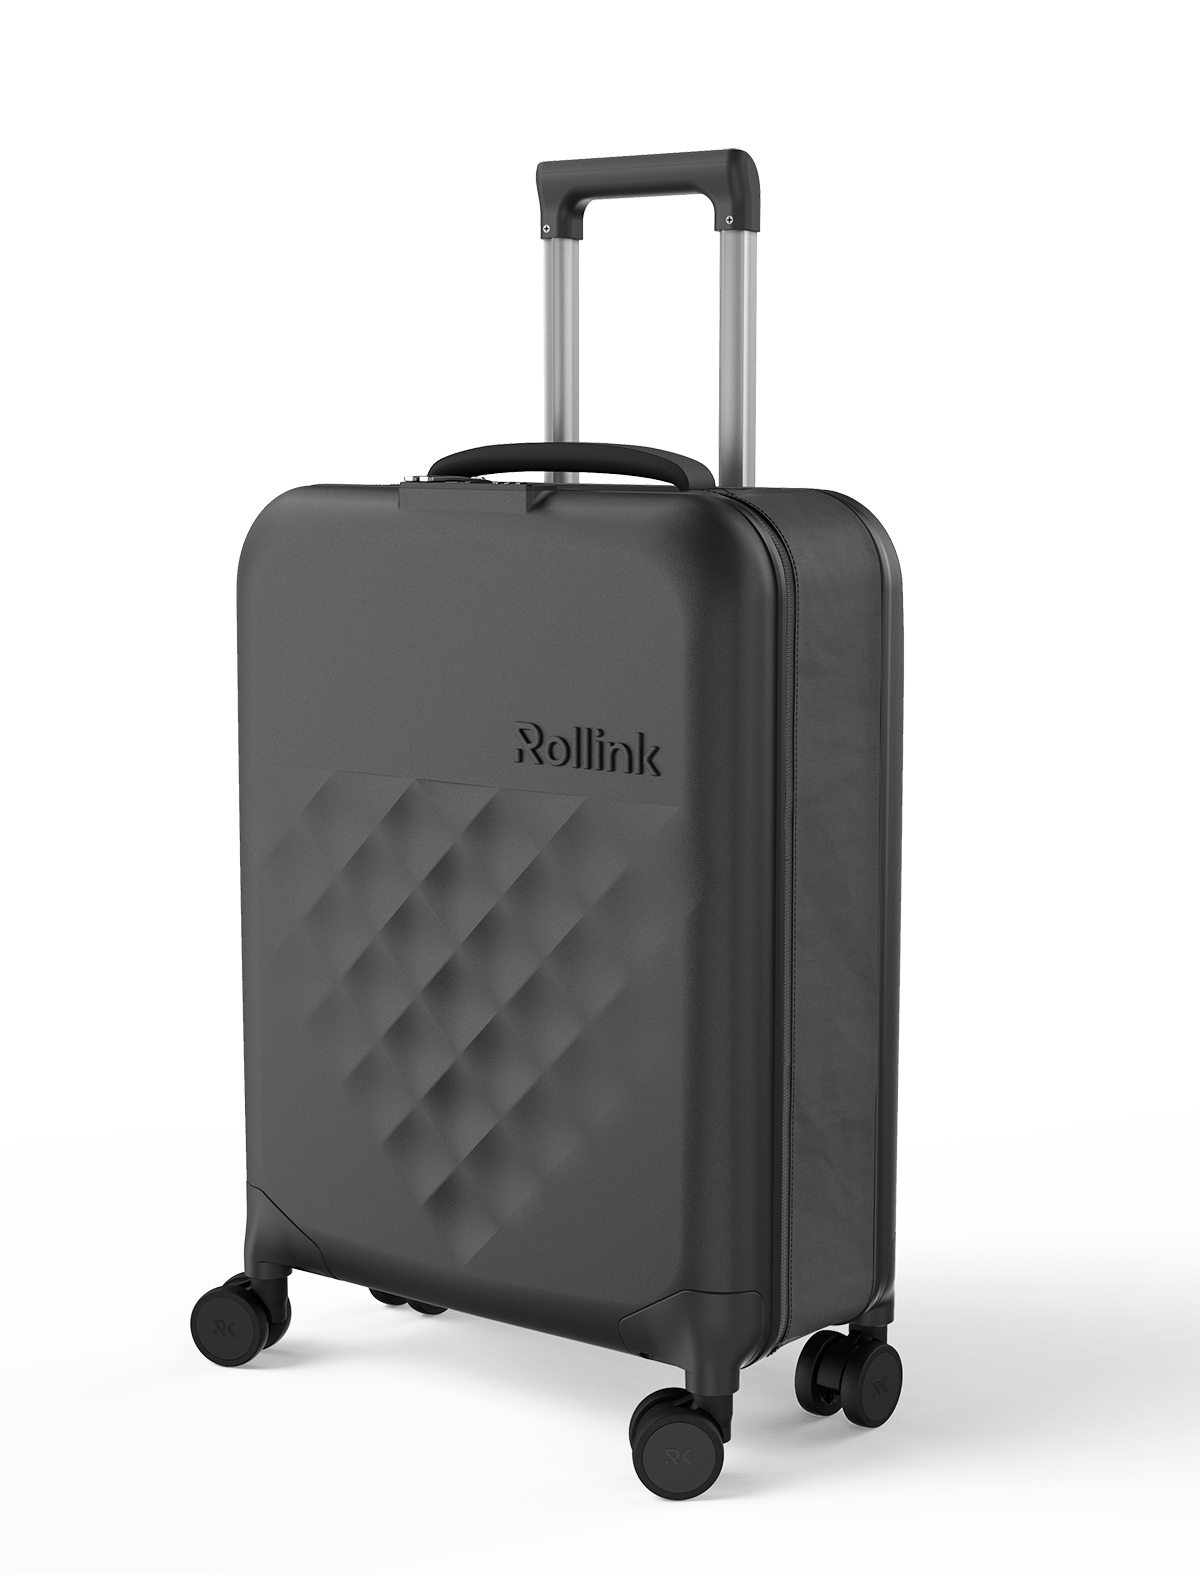 Rollink Flex 360° Collapsible 4-Wheel International Carry-On Luggage